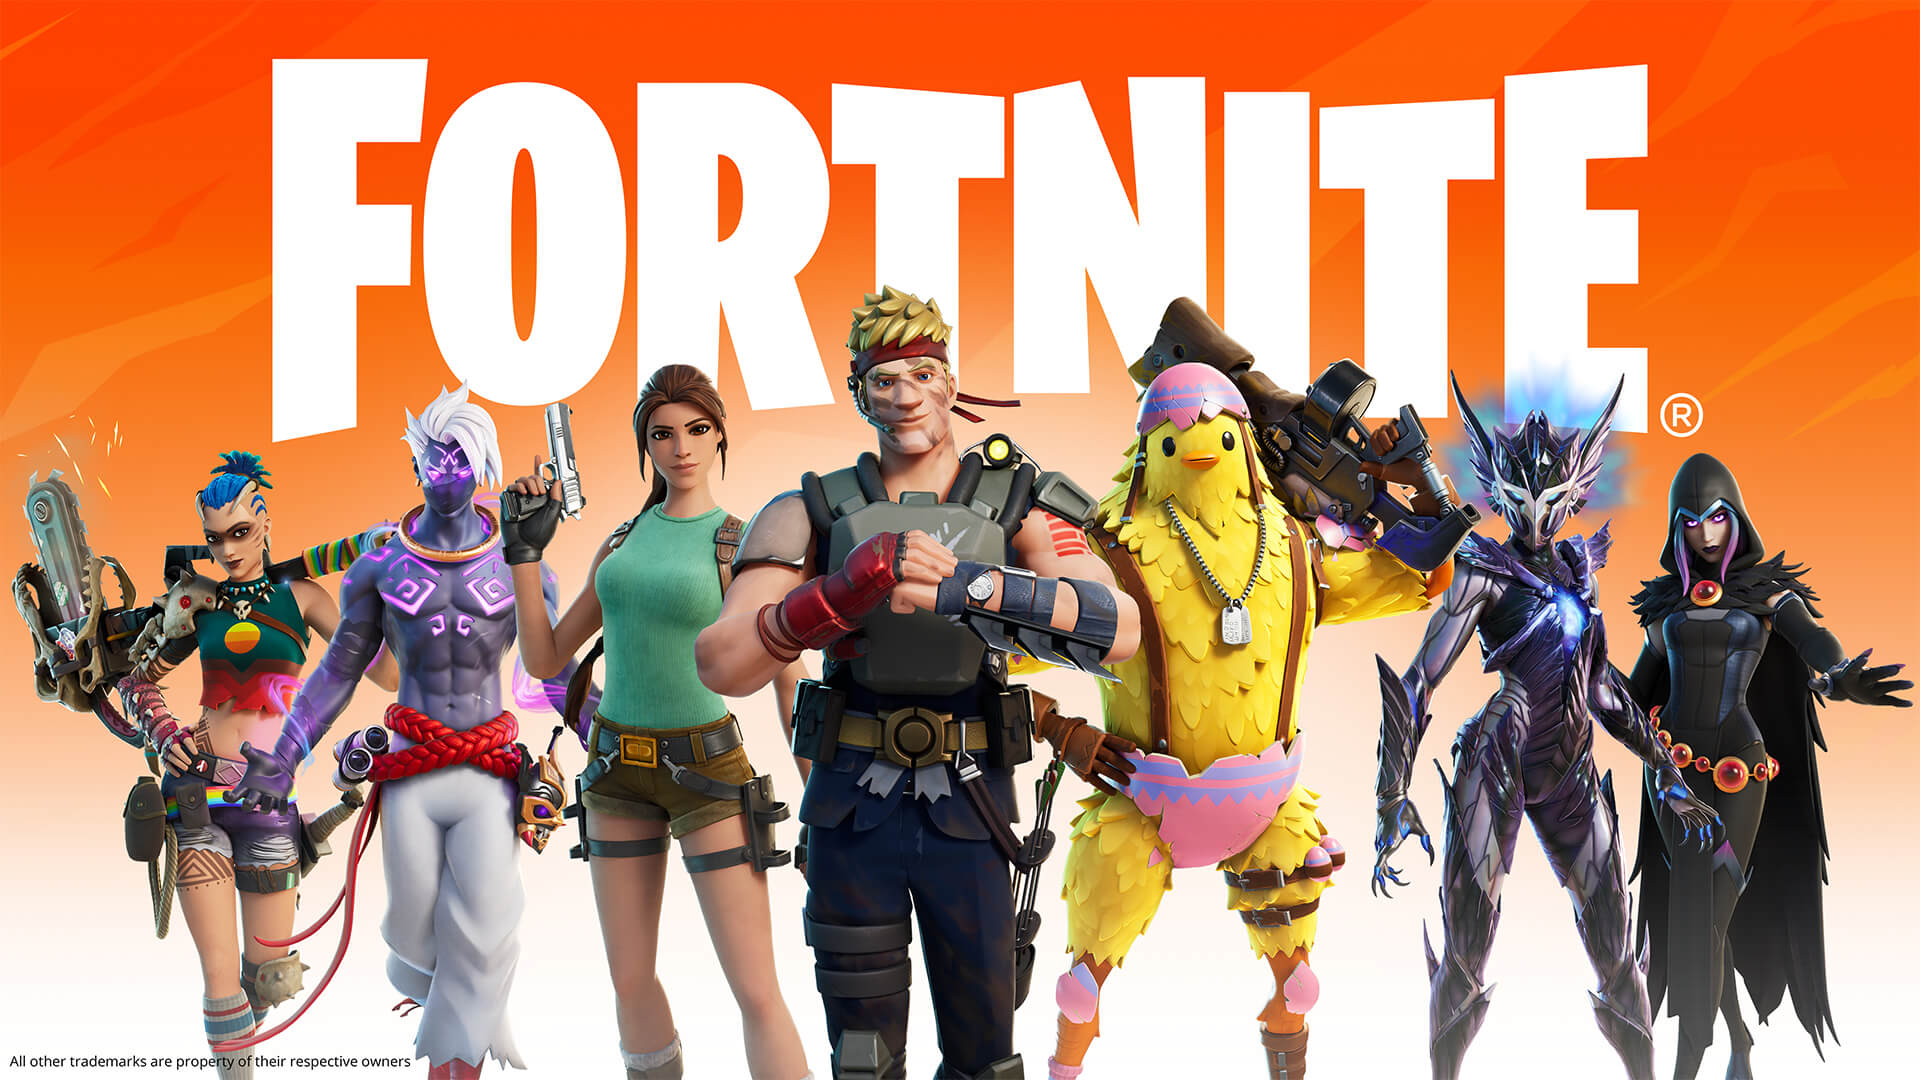 Epic Games sidesteps the Play Store with Fortnite for Android launch